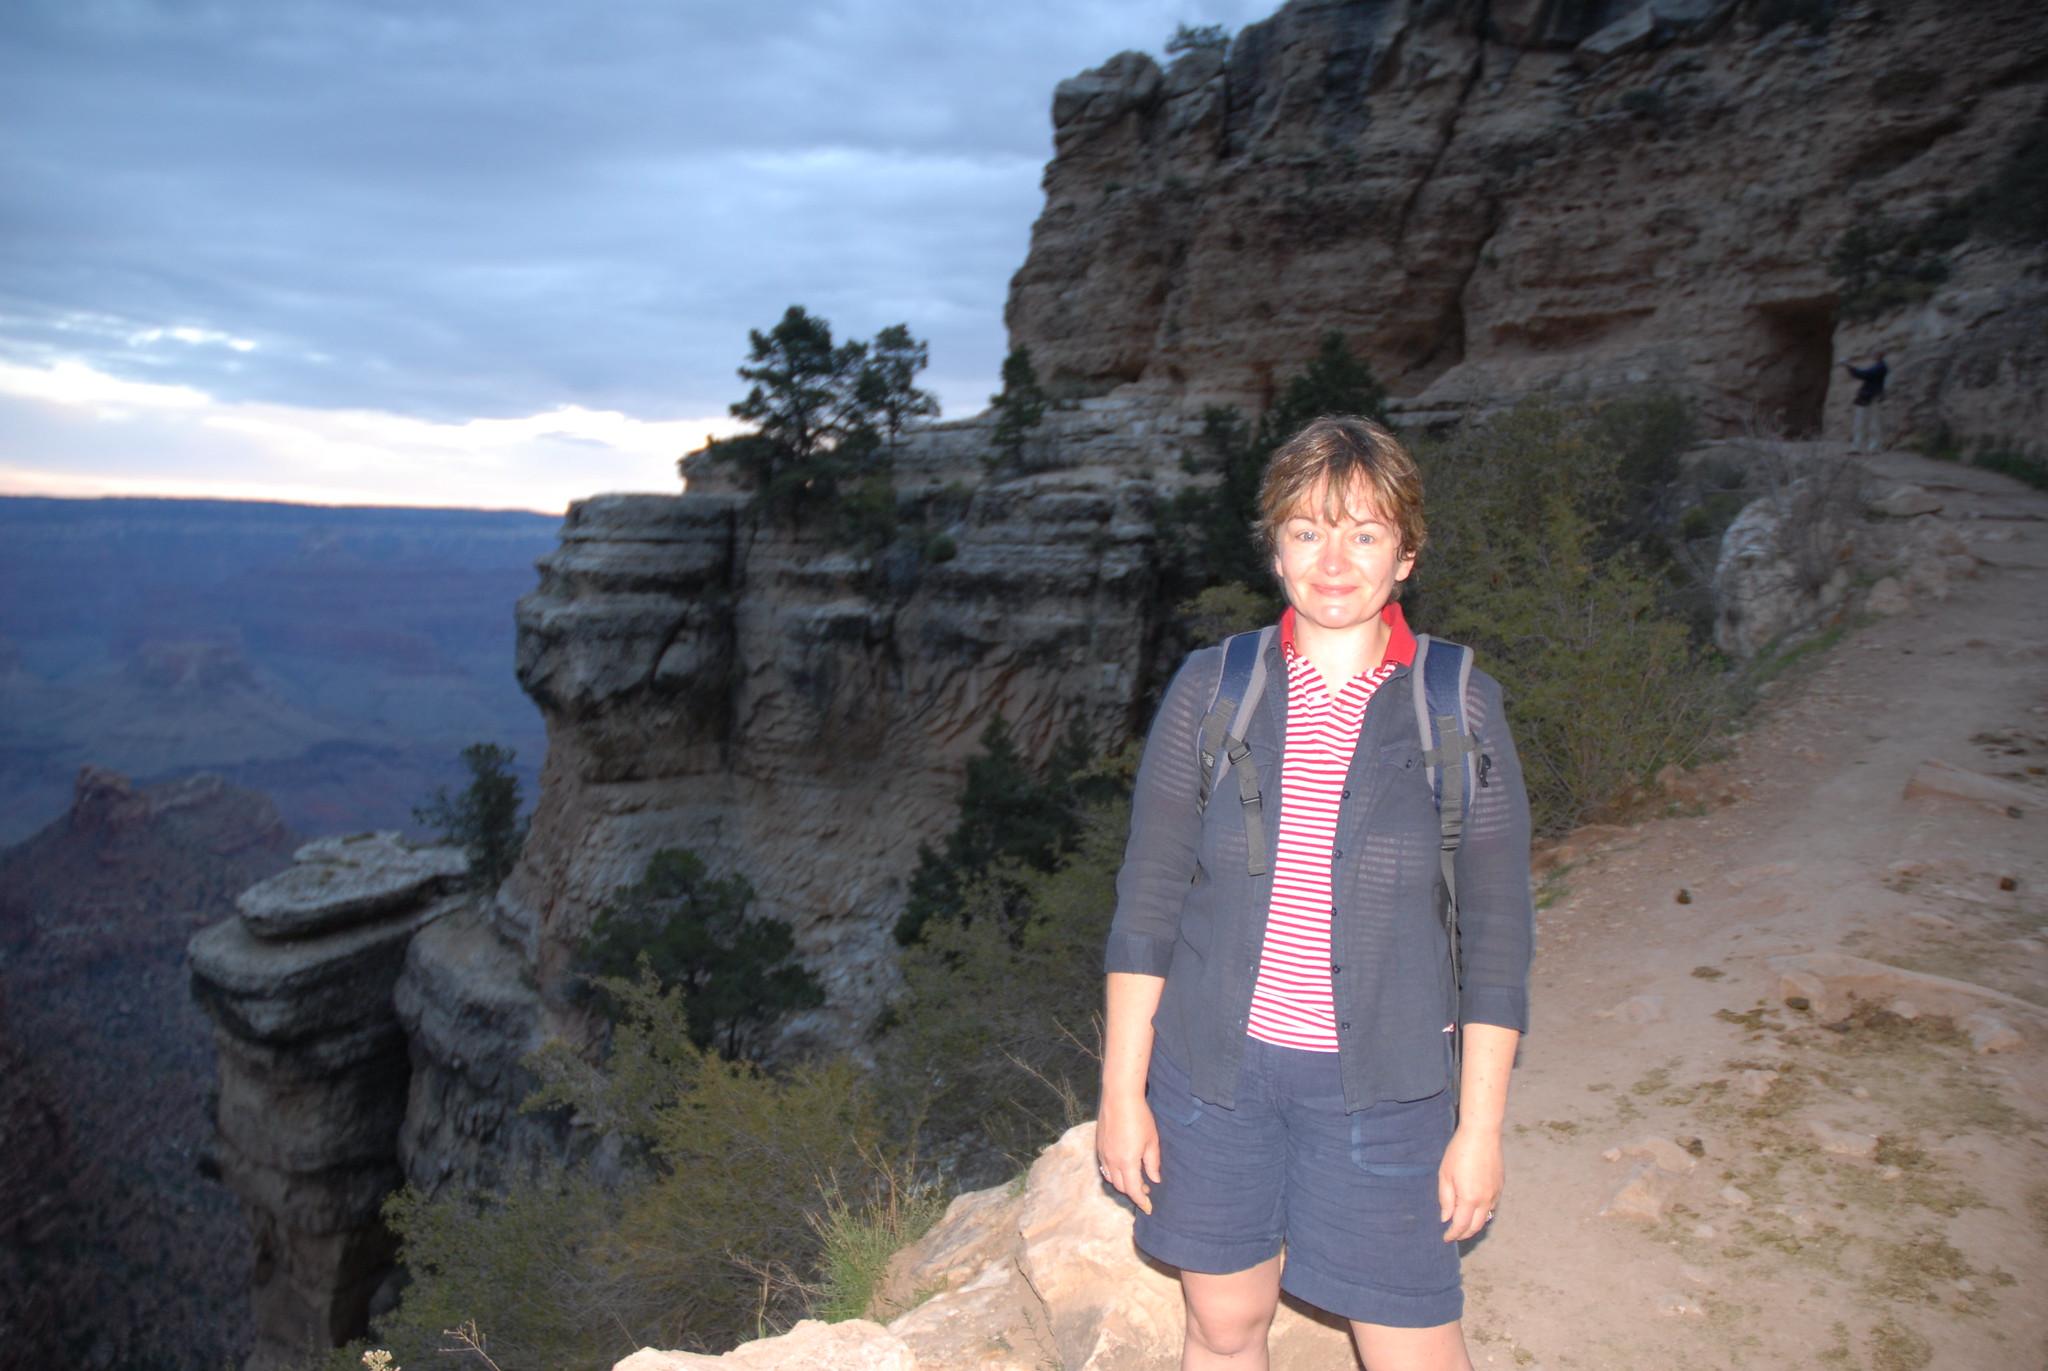 Early in the morning on the south rim of the Grand Canyon